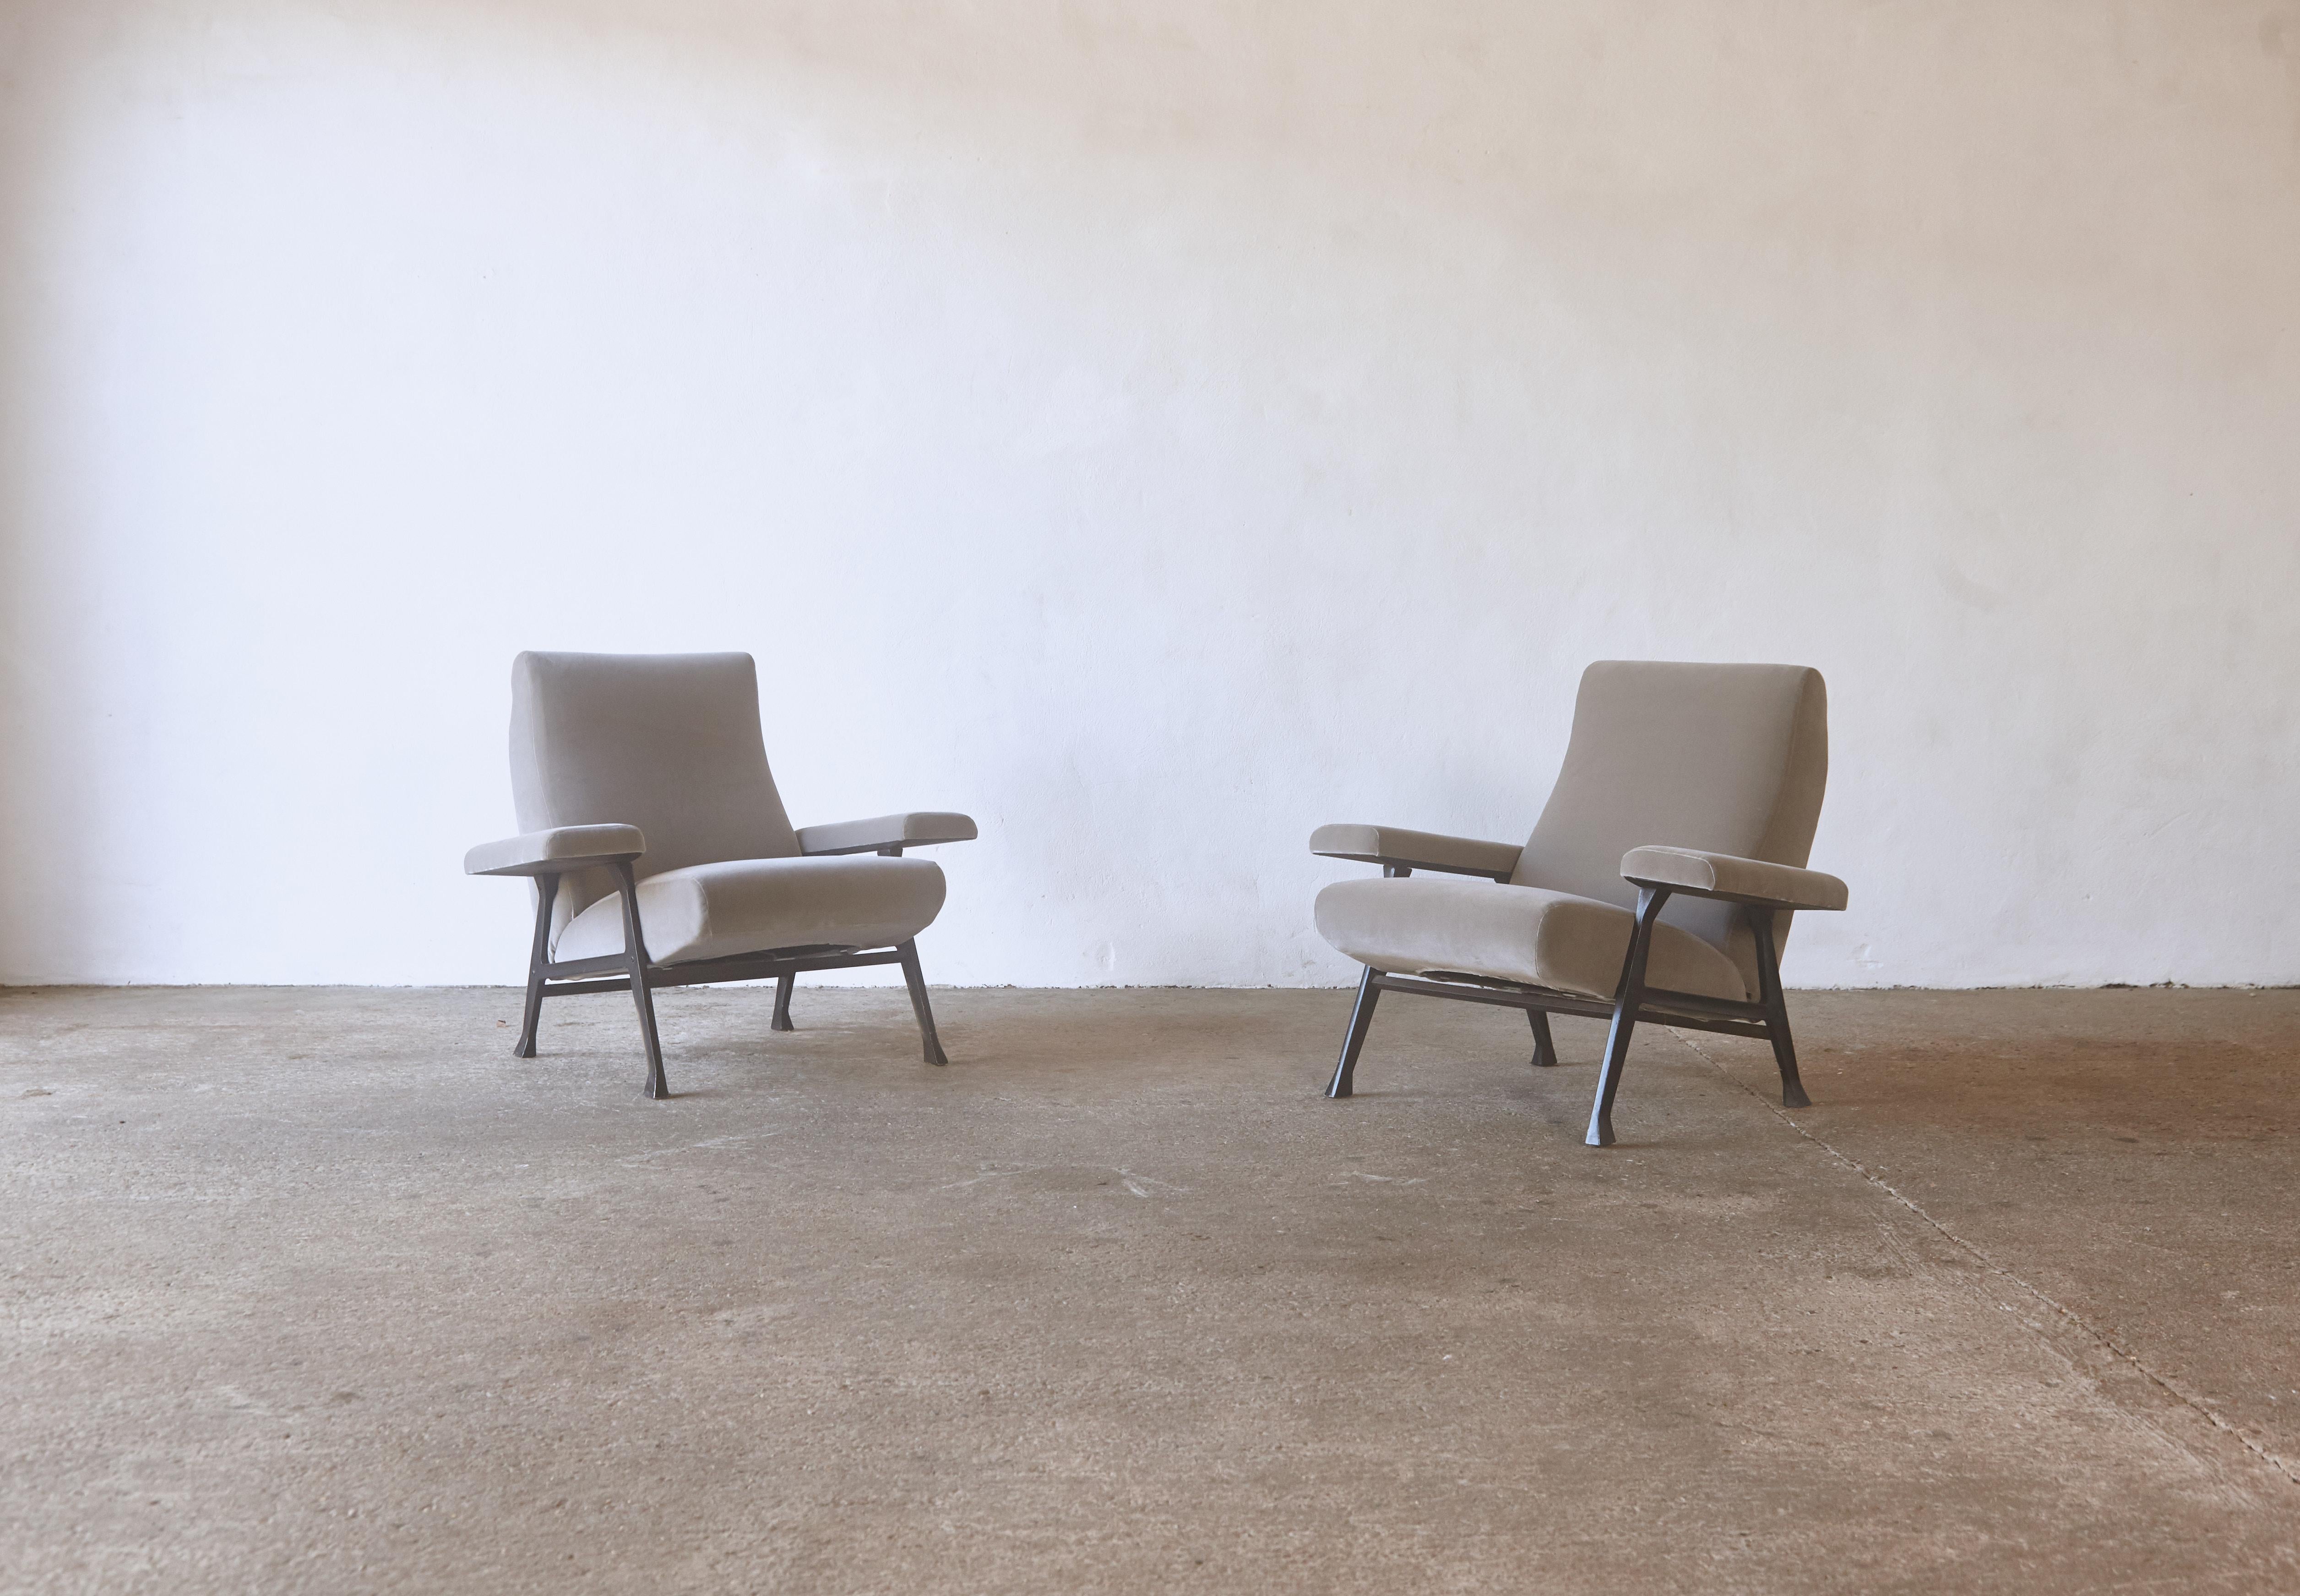 An original and rare early pair of Roberto Menghi hall chairs, produced by Arflex, Italy, 1950s. These chairs were specified by Gio Ponti for his Iconic Pirelli Tower in Milan. They were awarded the Prestigious Prize the Compasso d’Oro in 1959.